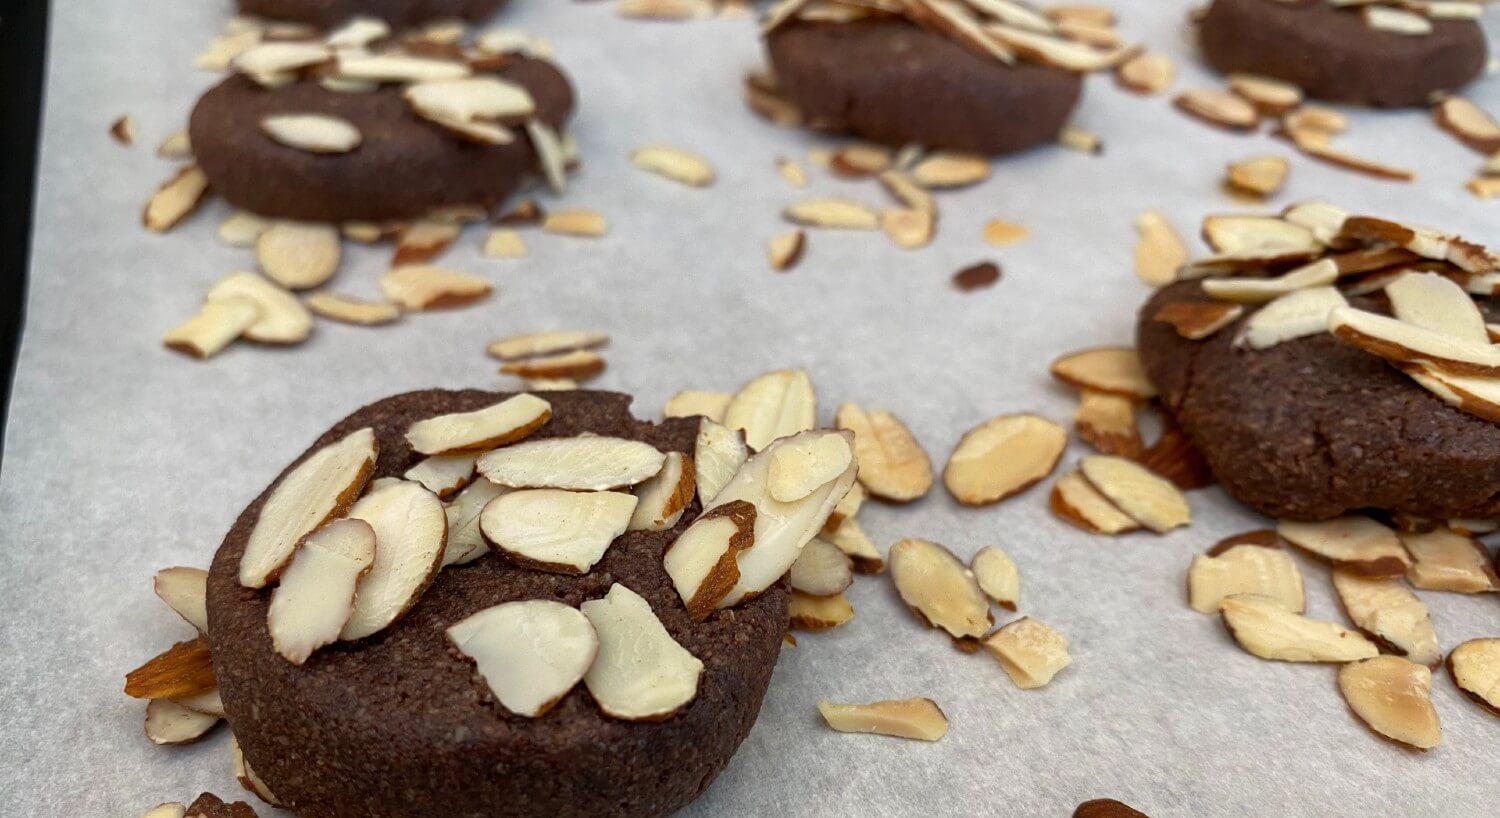 Parchment paper holding freshly baked brownie cookies covered in sliced almonds